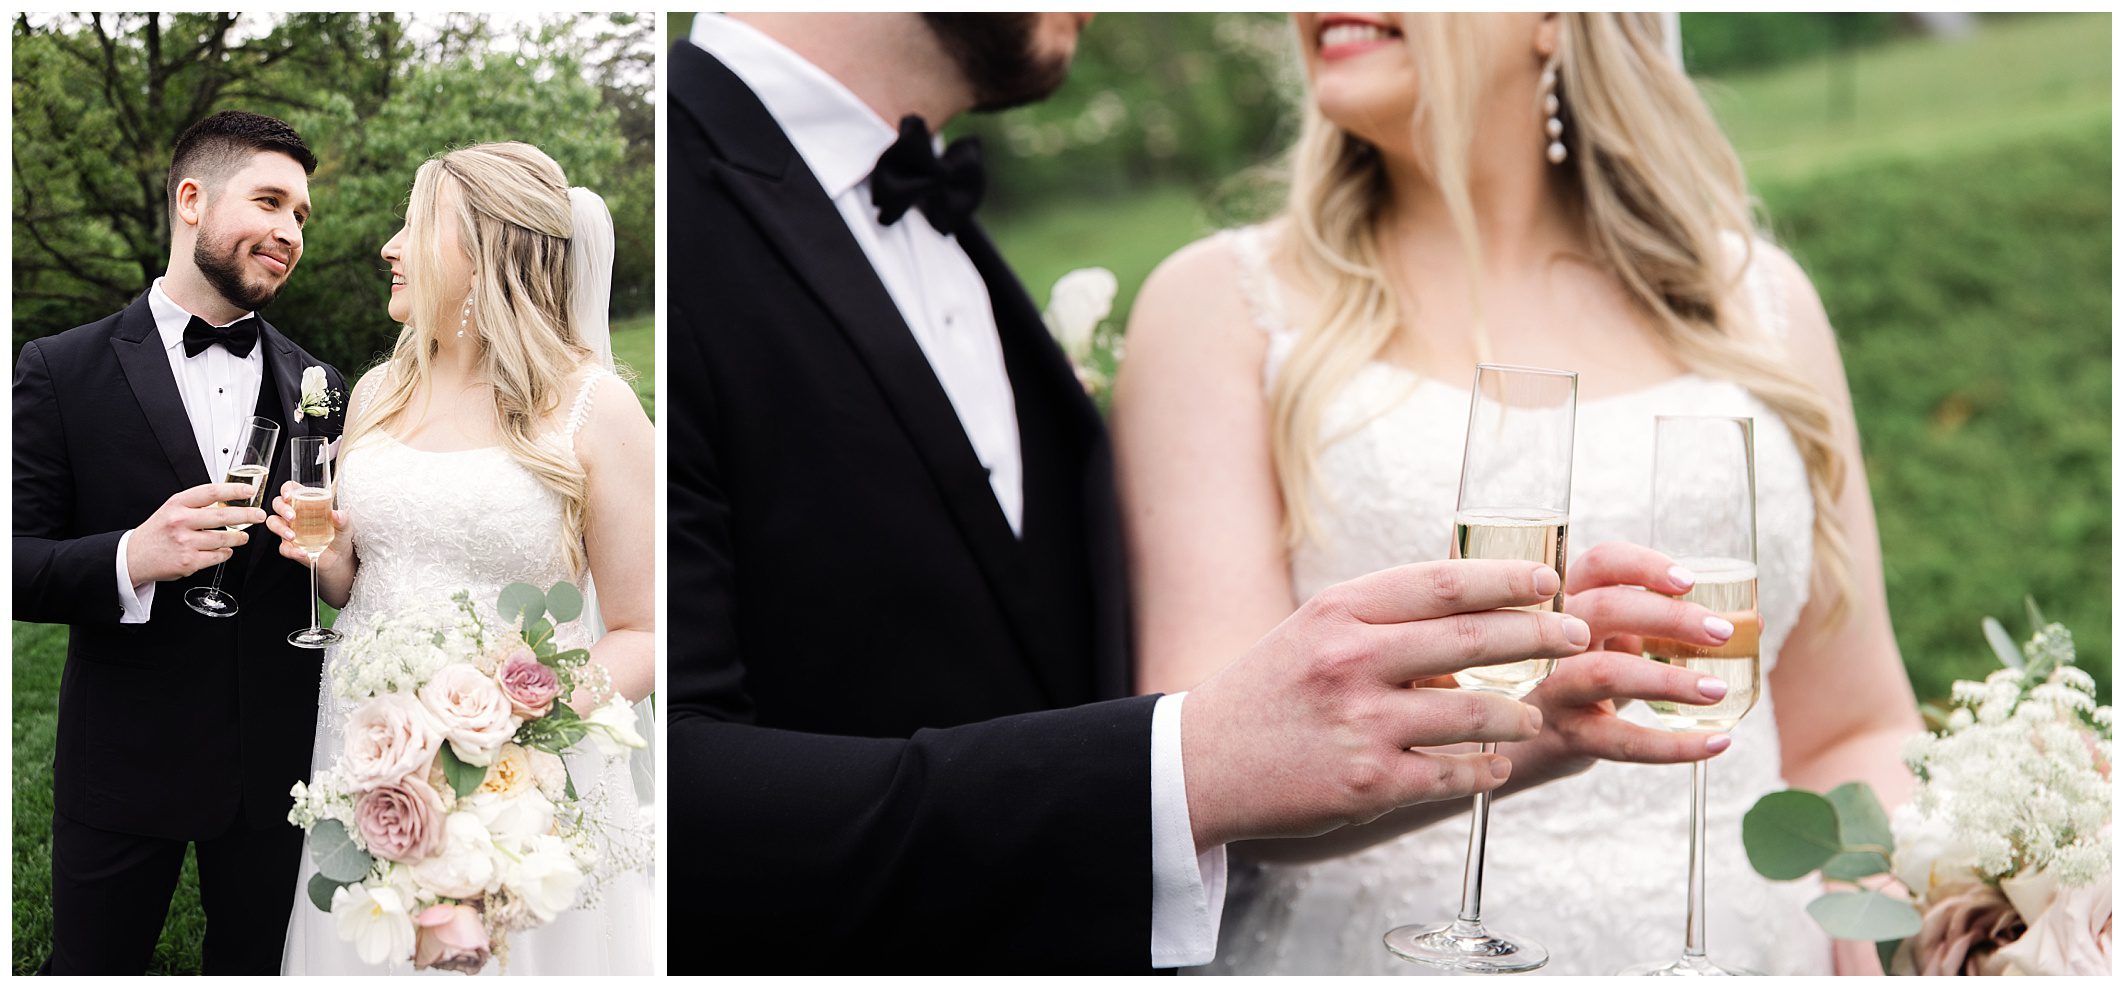 A bride and groom toasting with champagne glasses at a mountain wedding in a lush green setting, focusing on their joyful expressions and elegant wedding attire.